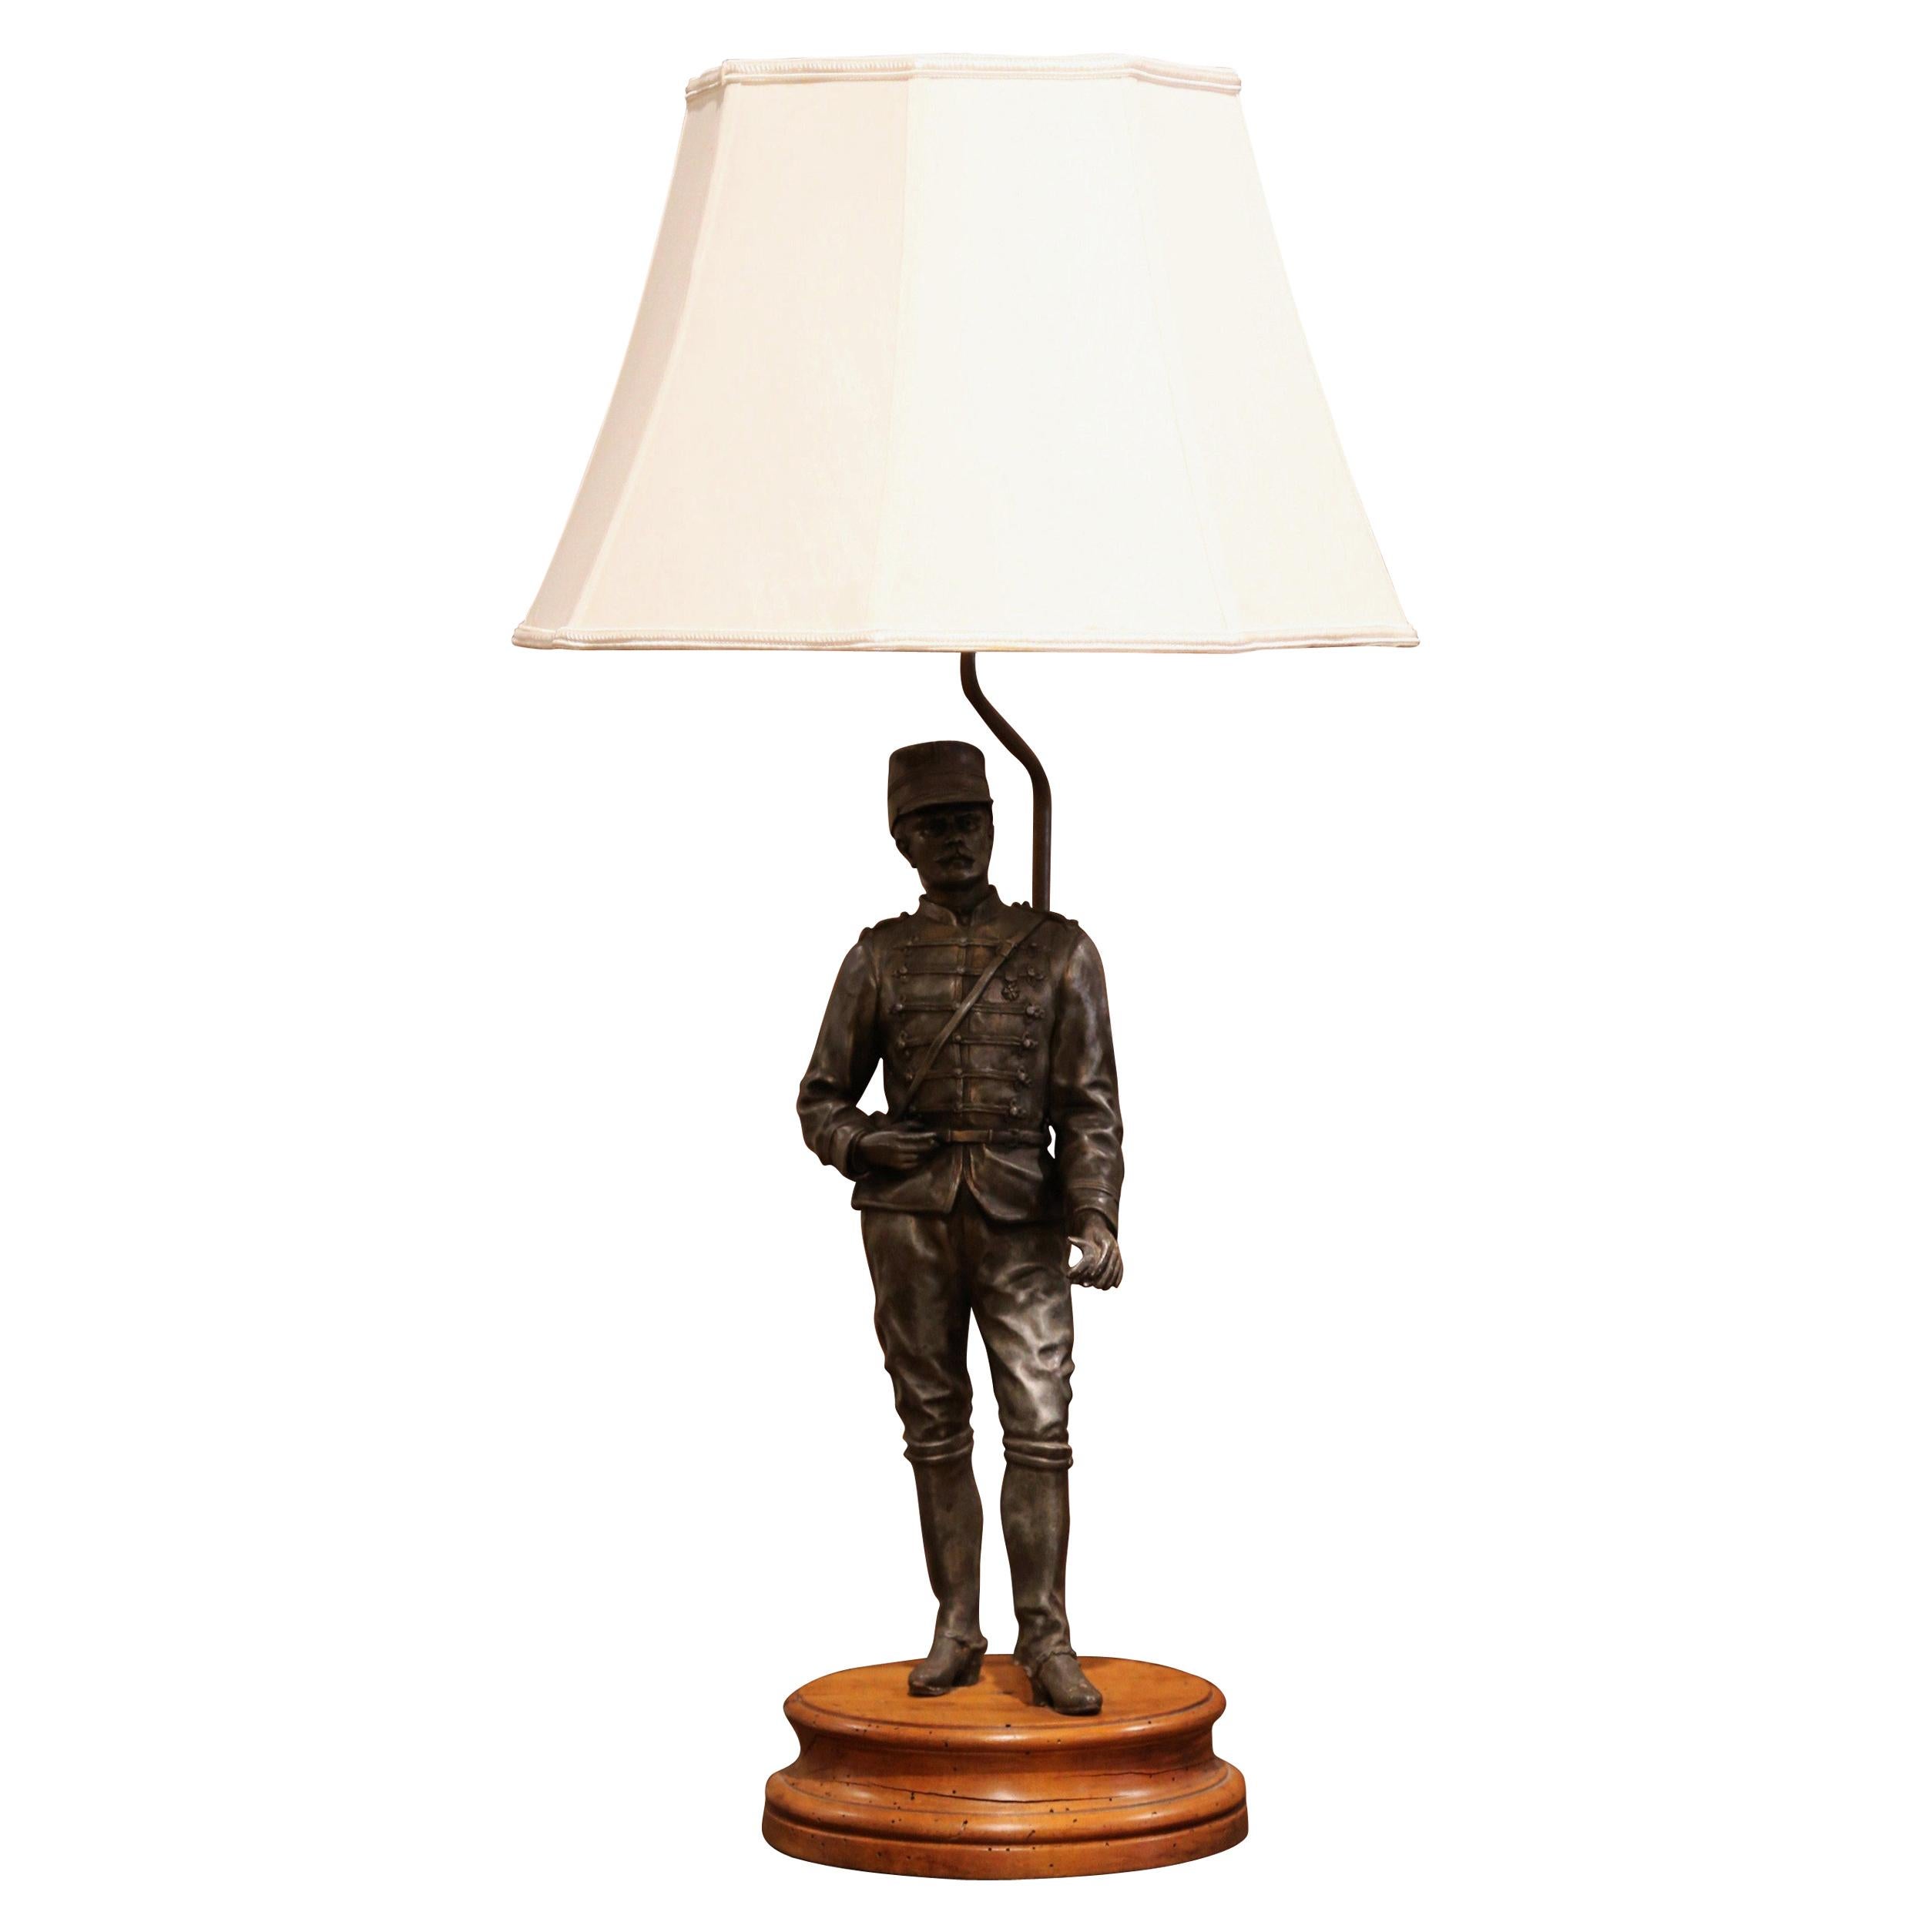 Decorate a man's desk or office with this antique masculine table lamp, crafted in France circa 1880 and standing on a round carved walnut base, the figurine depicts a French soldier in Napoleon III uniform. The light with a back rod has new wiring,